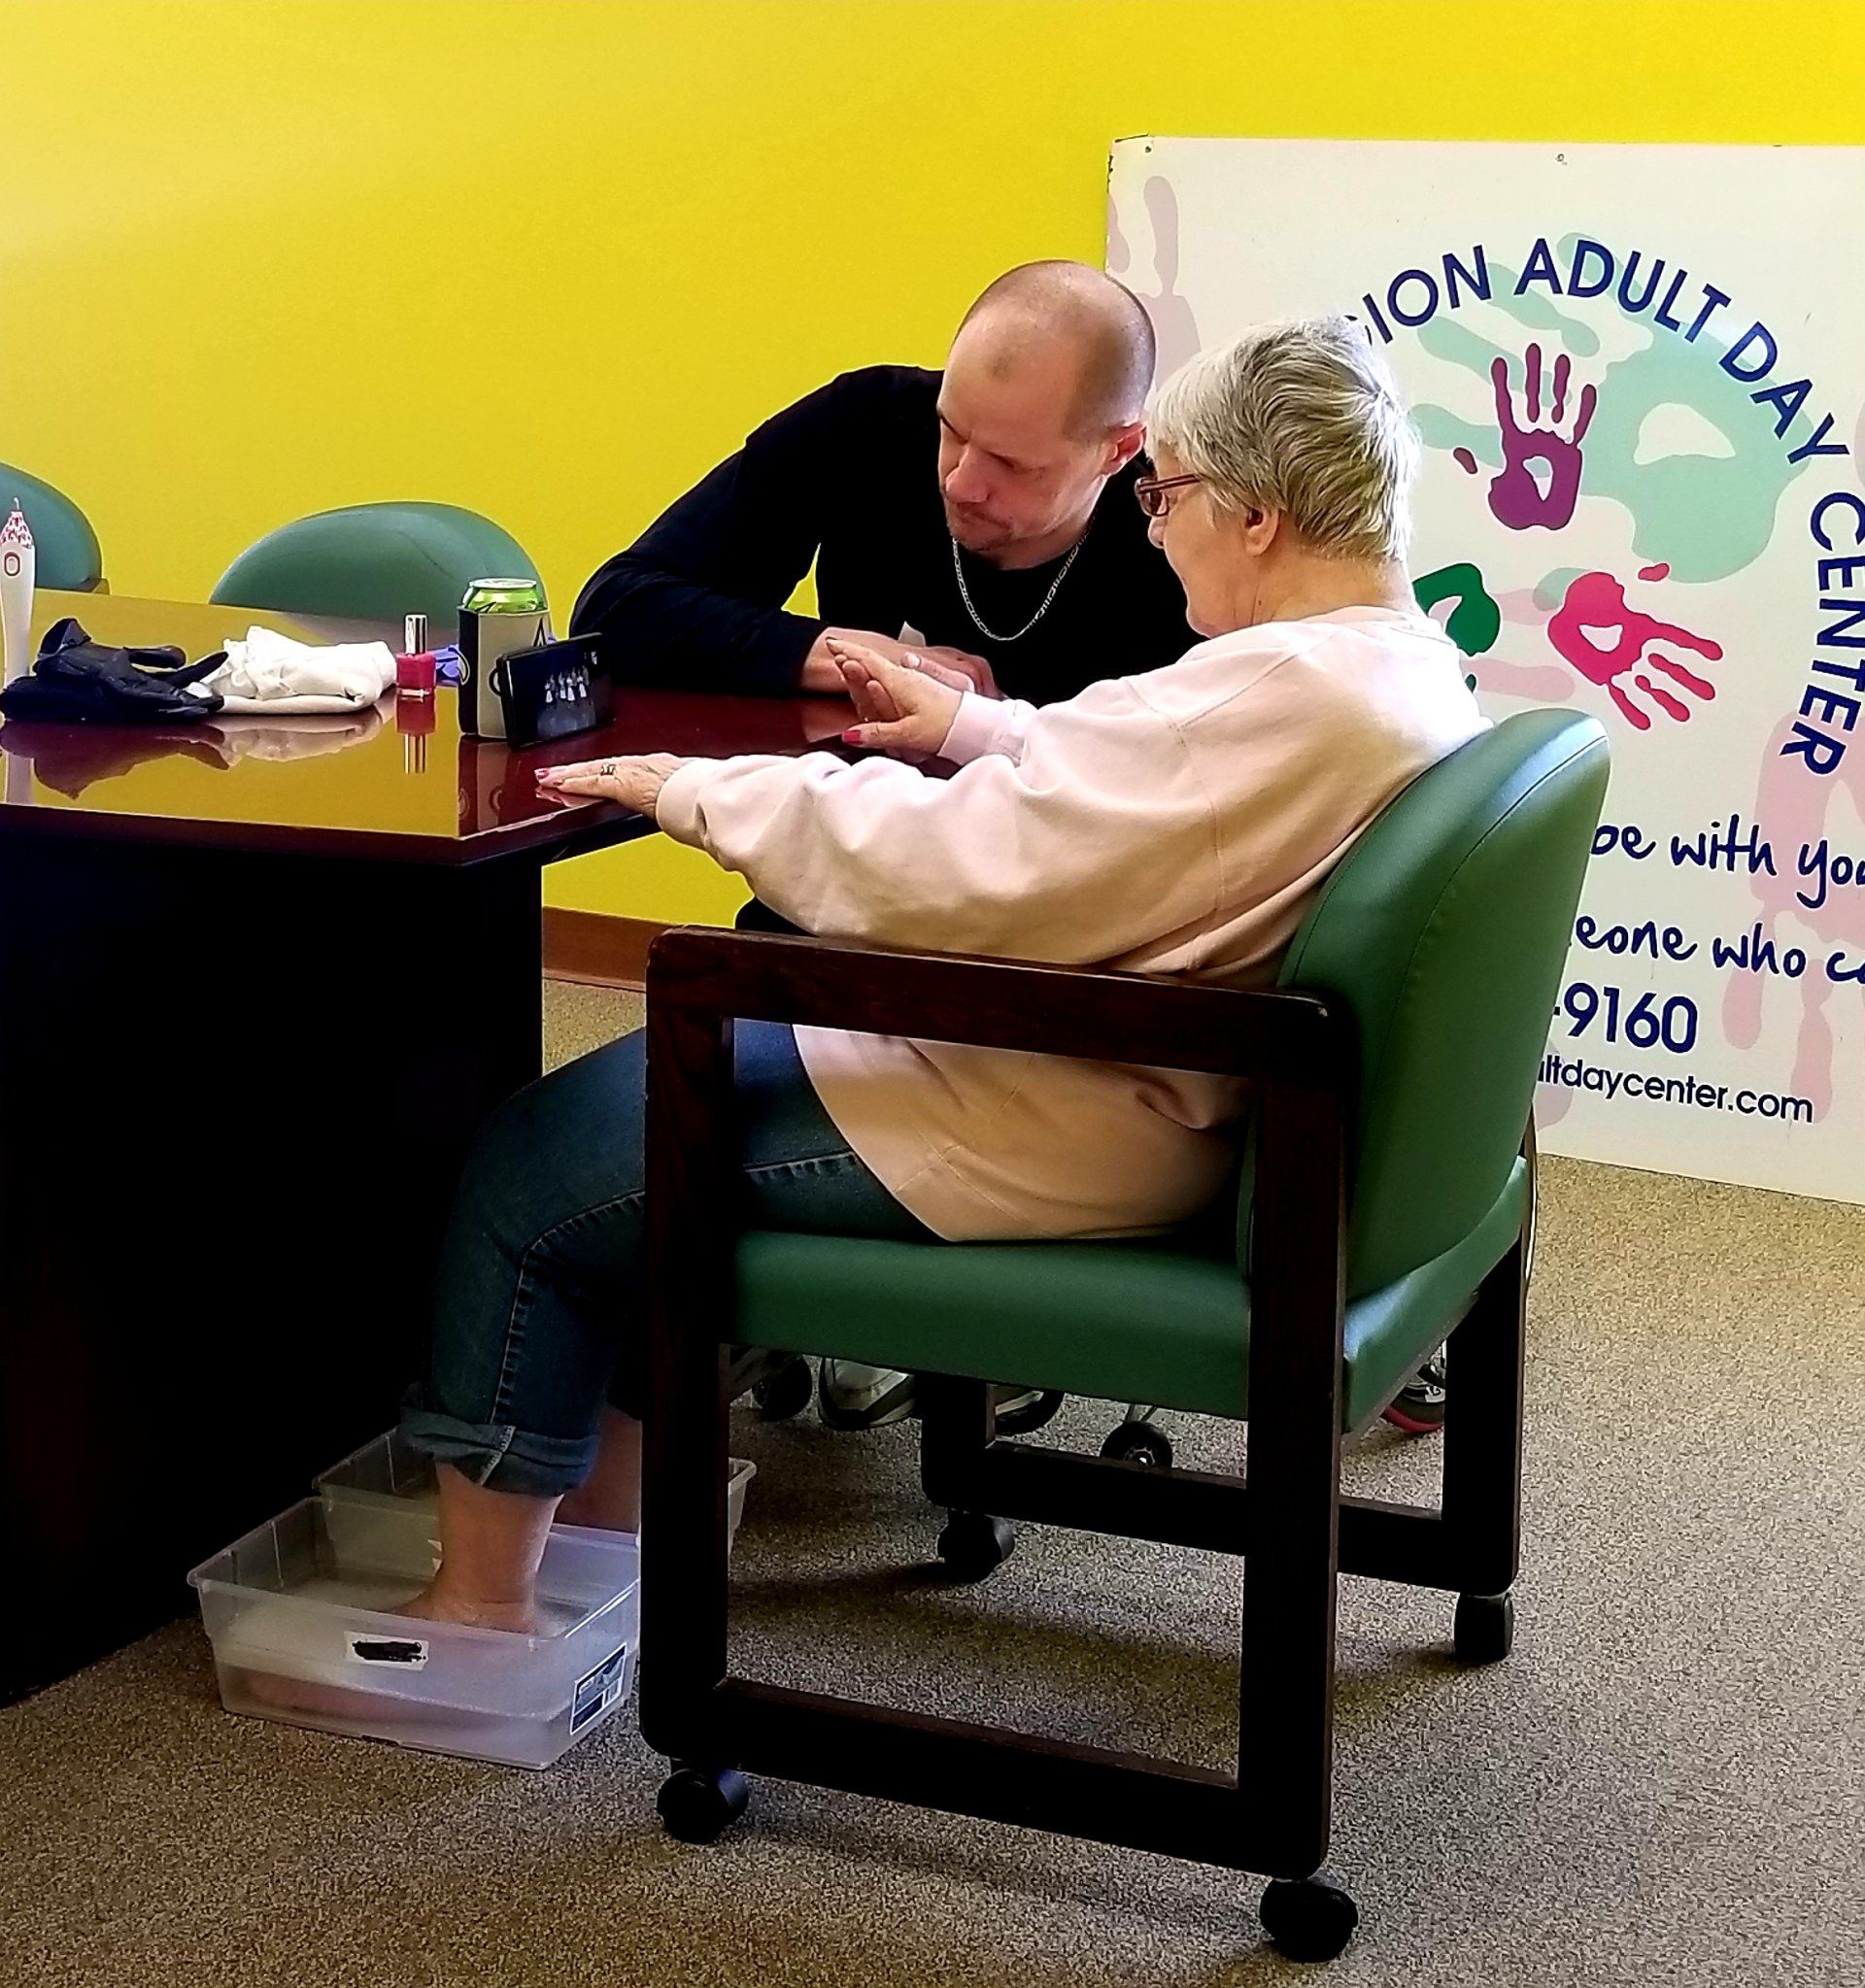 Adult Day Care | Coulee Region Adult Day Center | Onalaska, WI